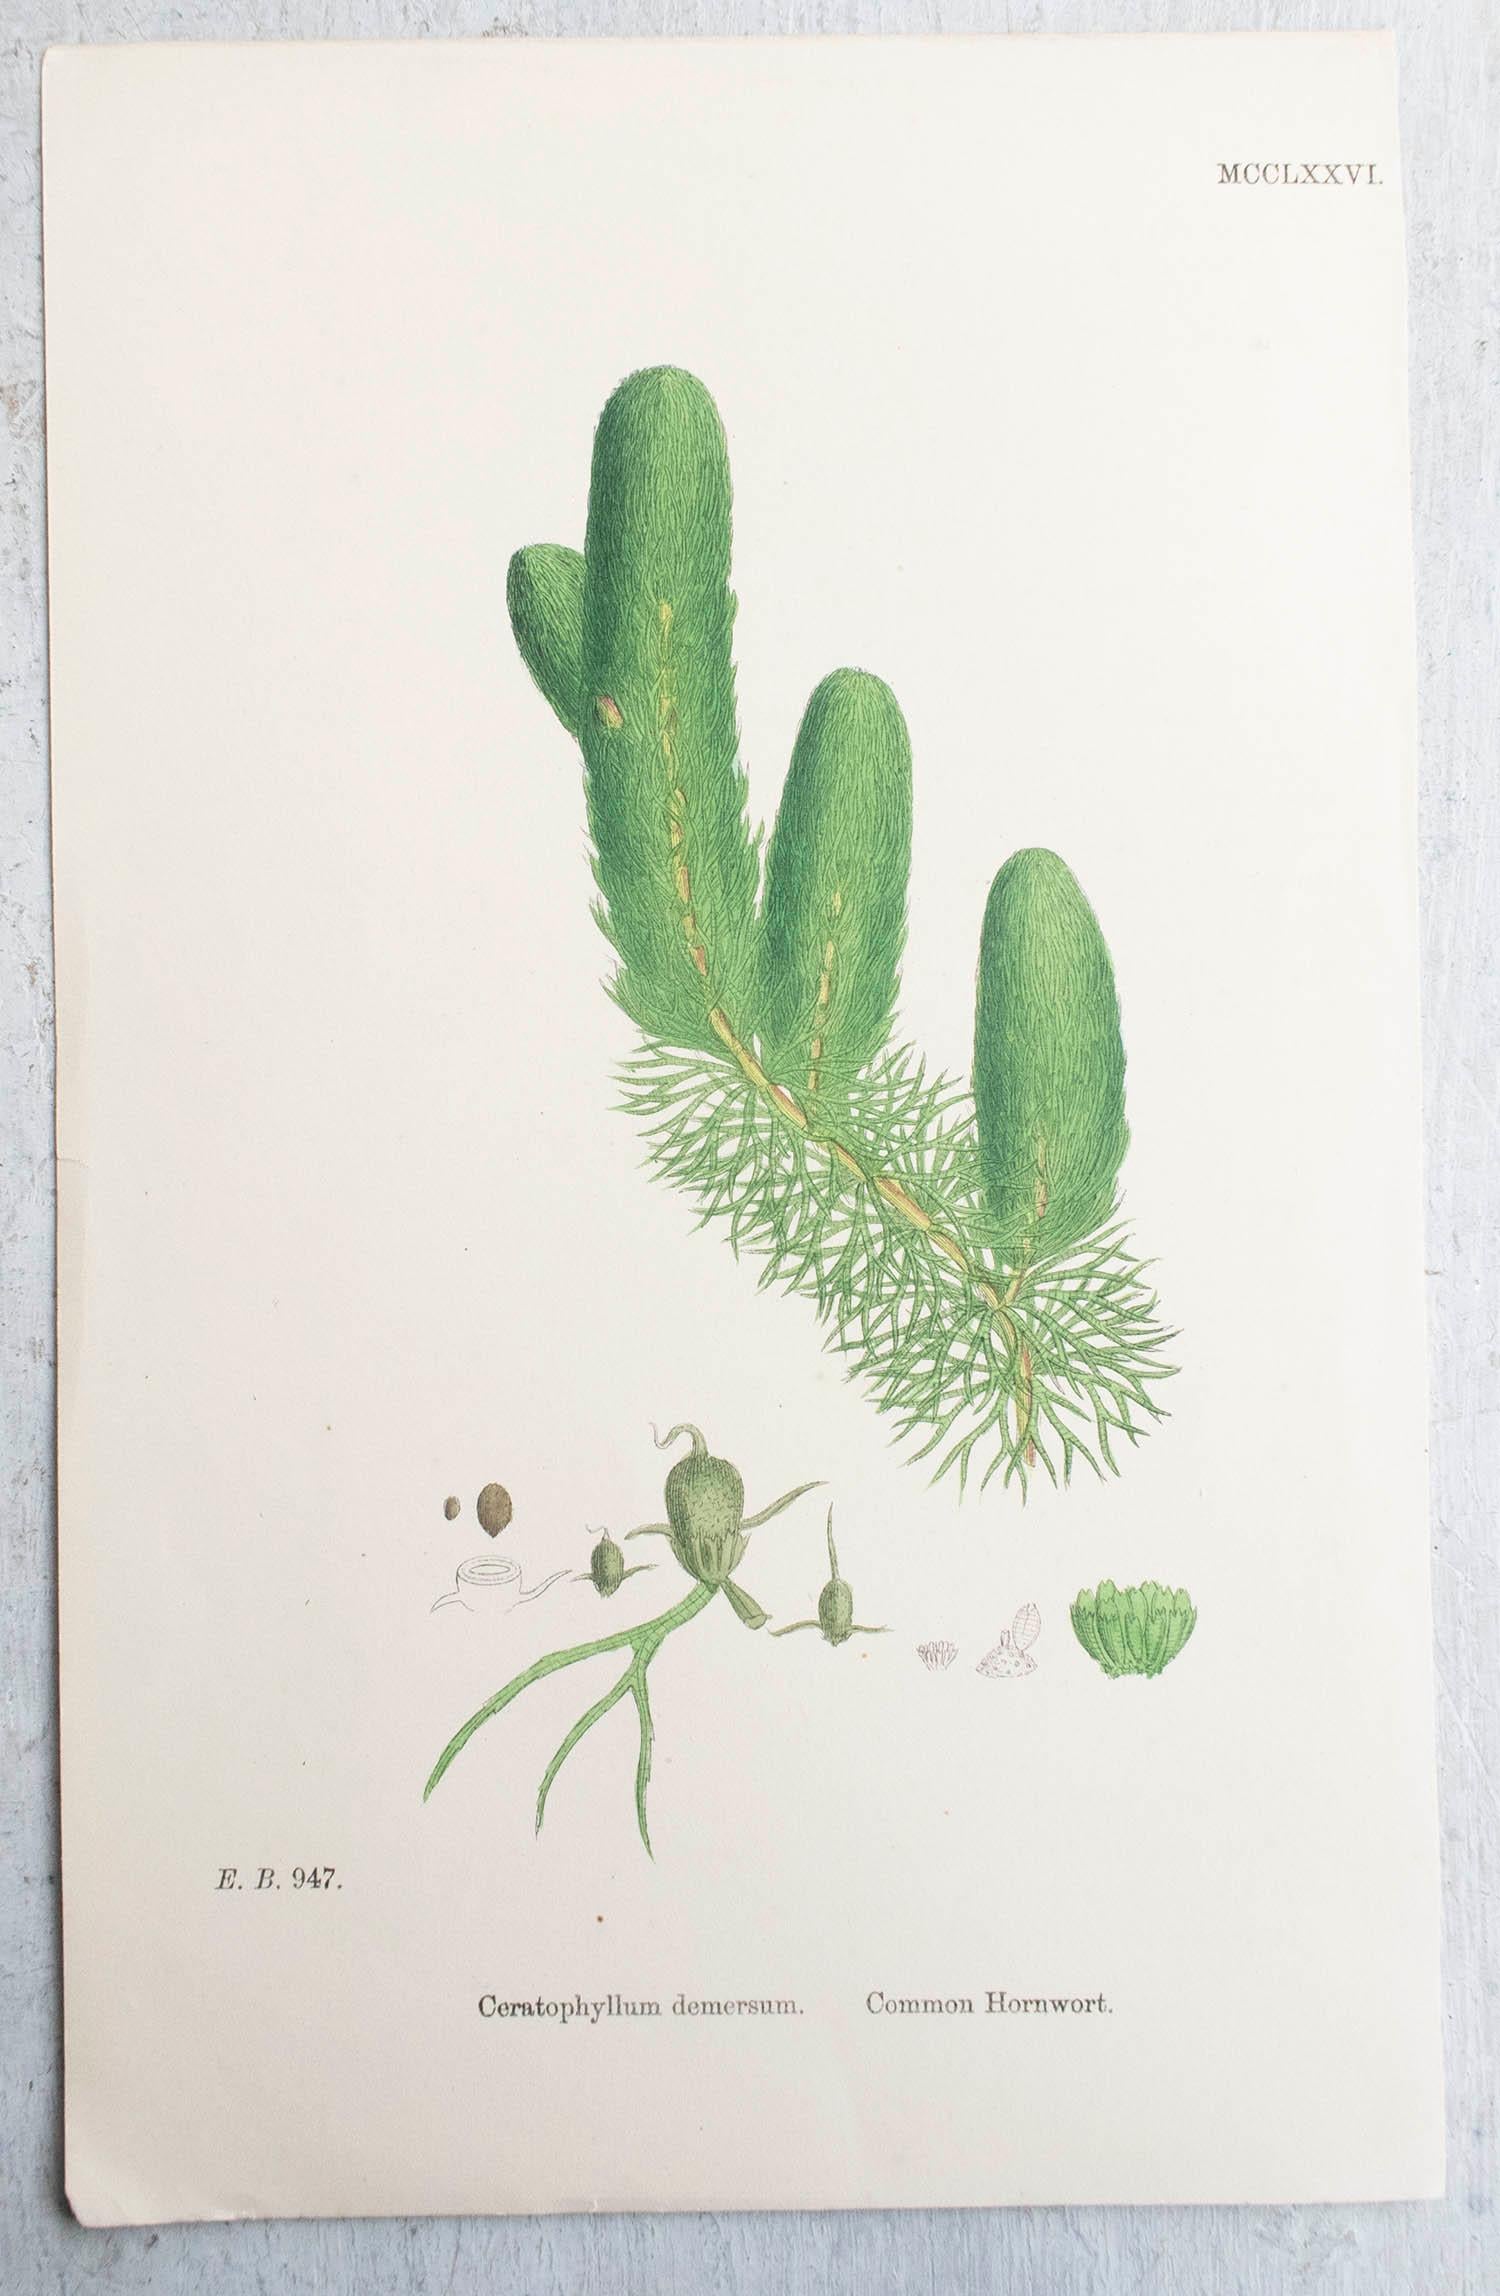 Wonderful set of 6 botanical prints

Lithographs after the original botanical drawings by Hooker.

Original color

Published, circa 1850

Unframed.

The measurement given is for one print.

